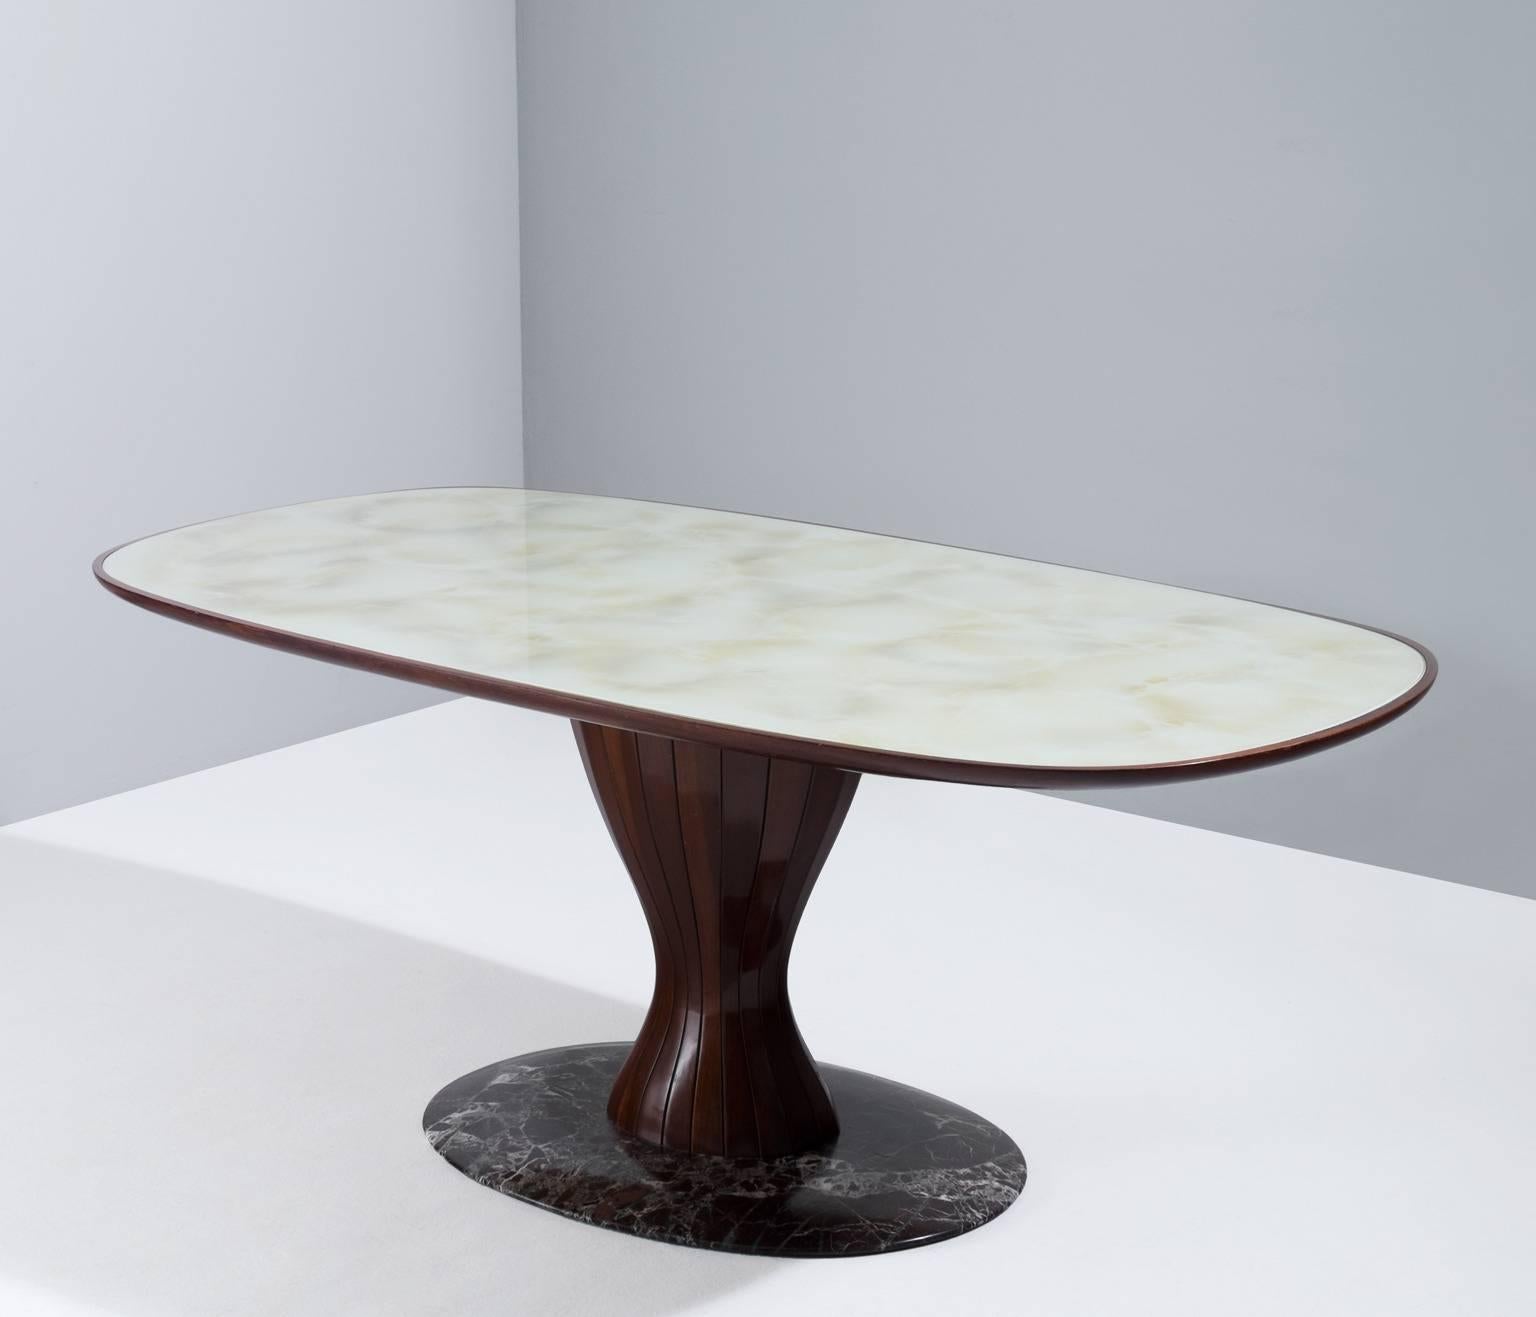 Center table, in wood and glass, Italy 1950s.

Wonderful Italian pedestal table in wood and painted marble look, finished with a glass top.
In the manner of early Osvaldo Borsani, Italy 1950s.

The dark stained wooden base shows magnificent